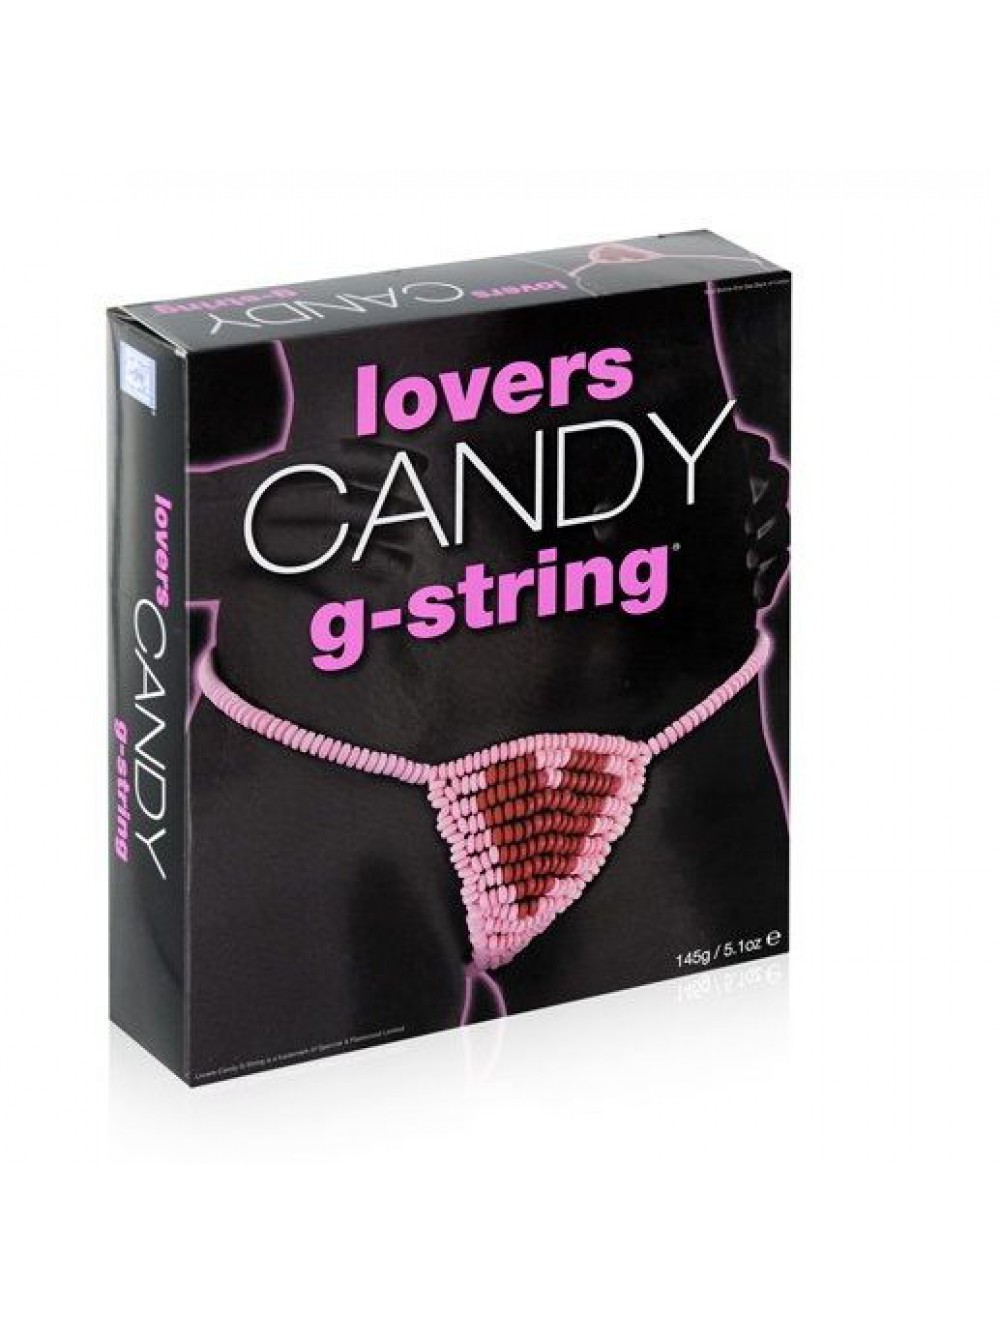 CANDY G STRING LOVERS 5022782222666